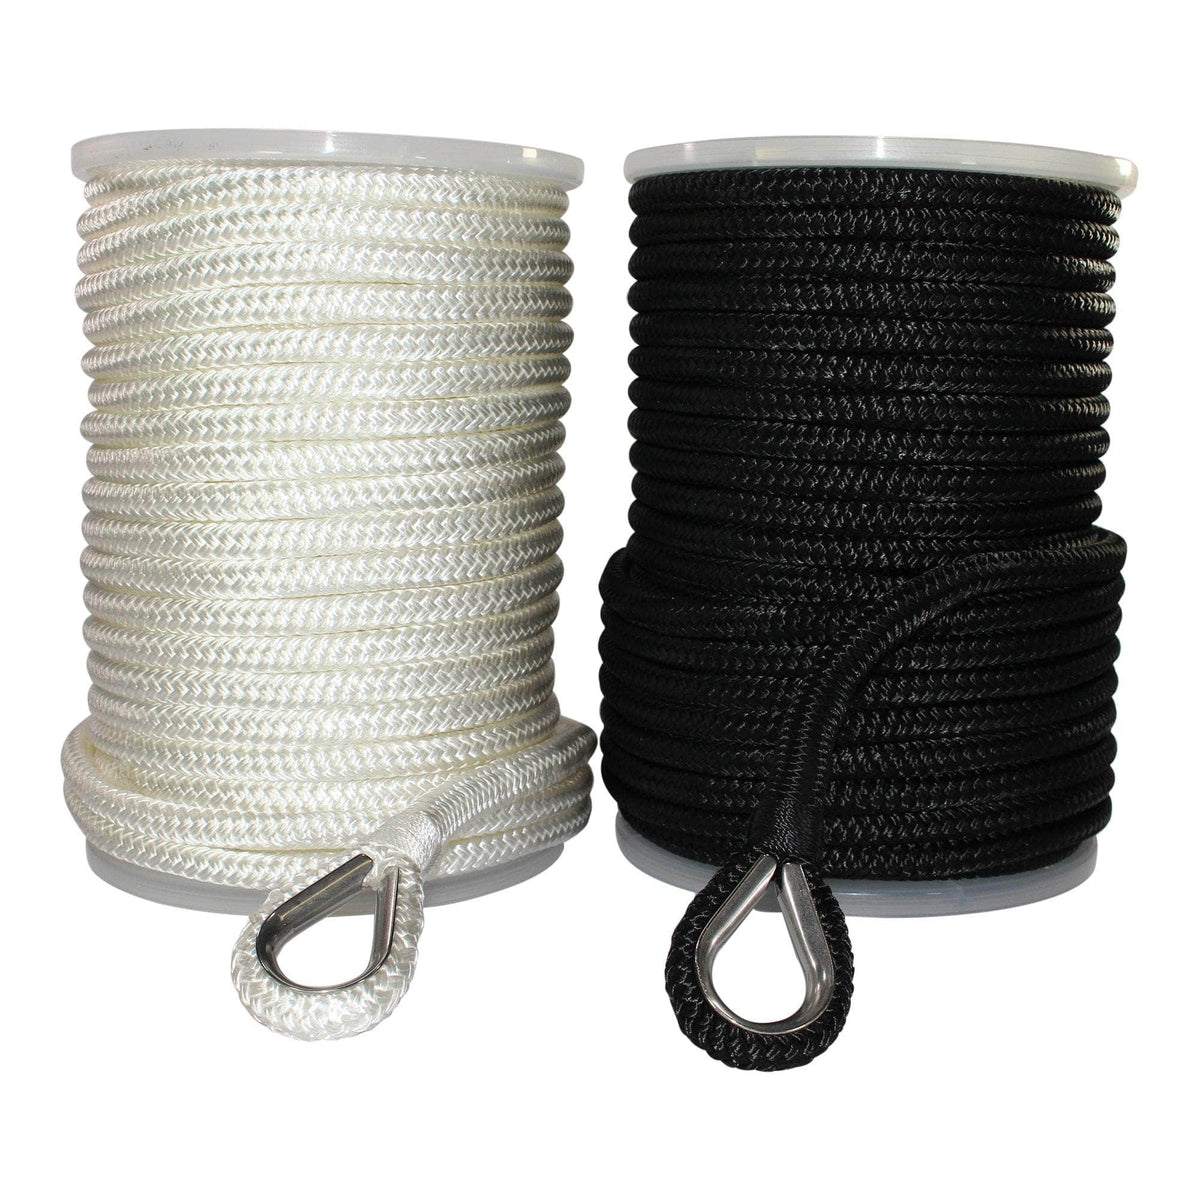 Anchor Rope 50 Ft, Premium Solid Braid MFP Anchor Line with 316